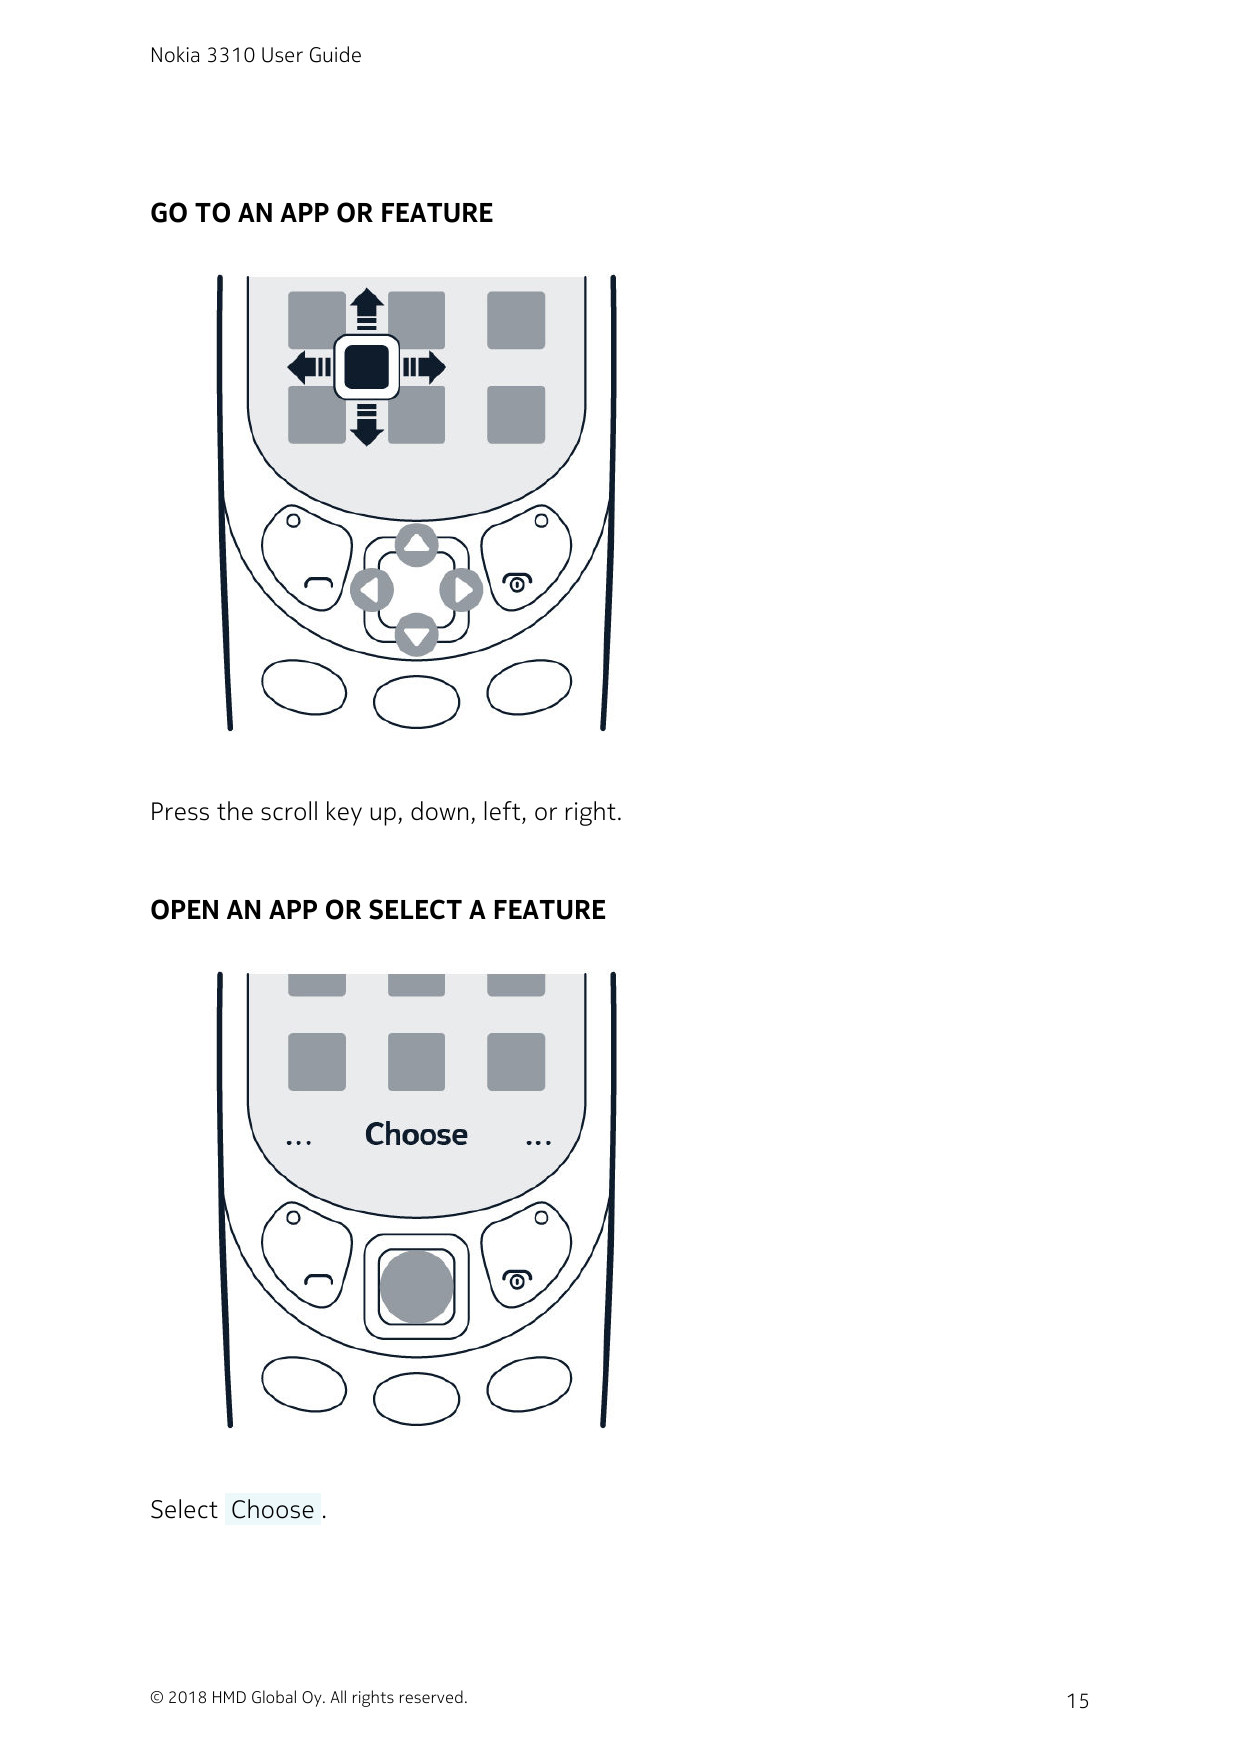 Nokia 3310 User GuideGO TO AN APP OR FEATUREPress the scroll key up, down, left, or right.OPEN AN APP OR SELECT A FEATURESelect 